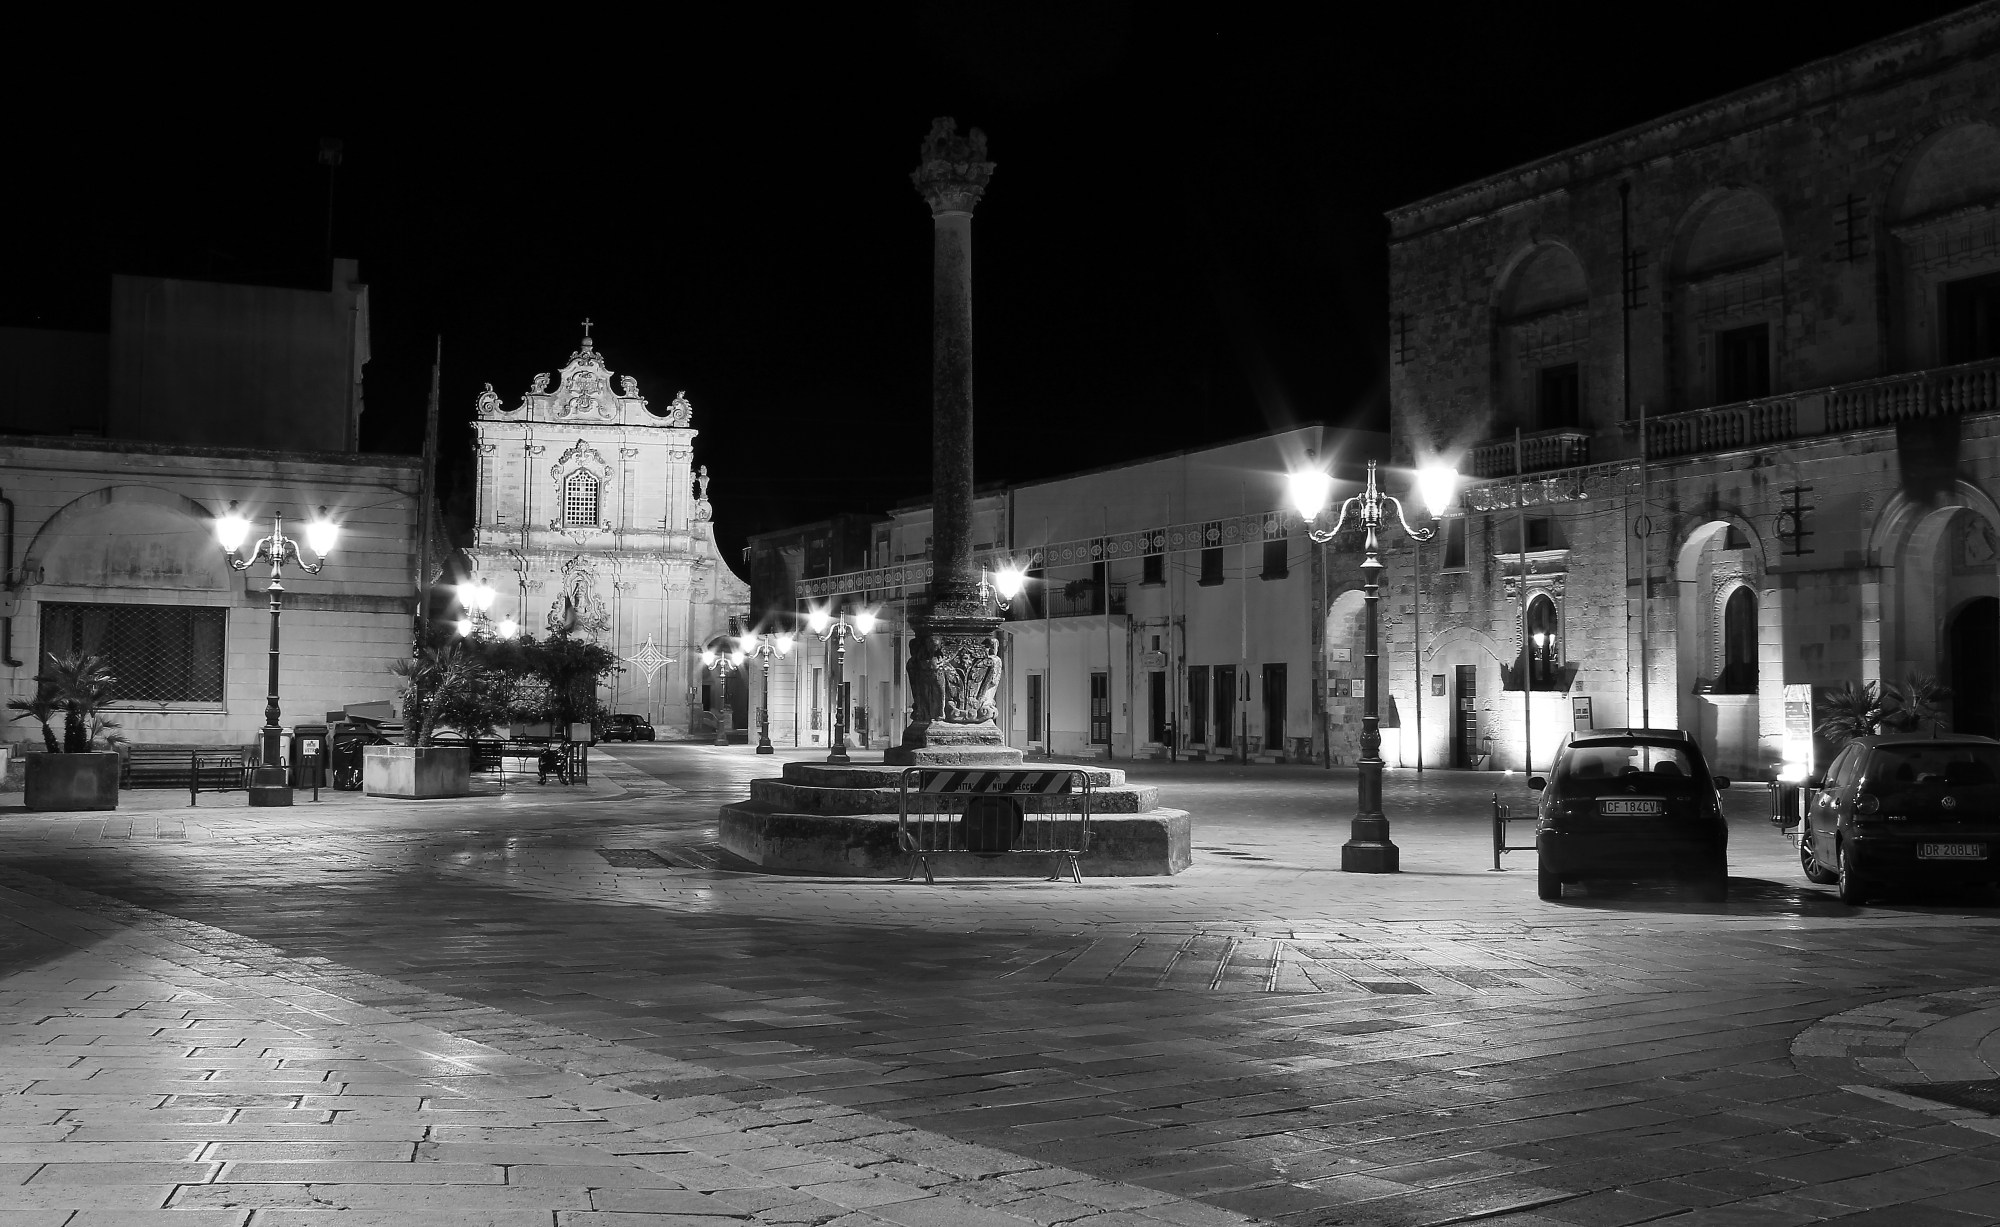 People's Square by night...